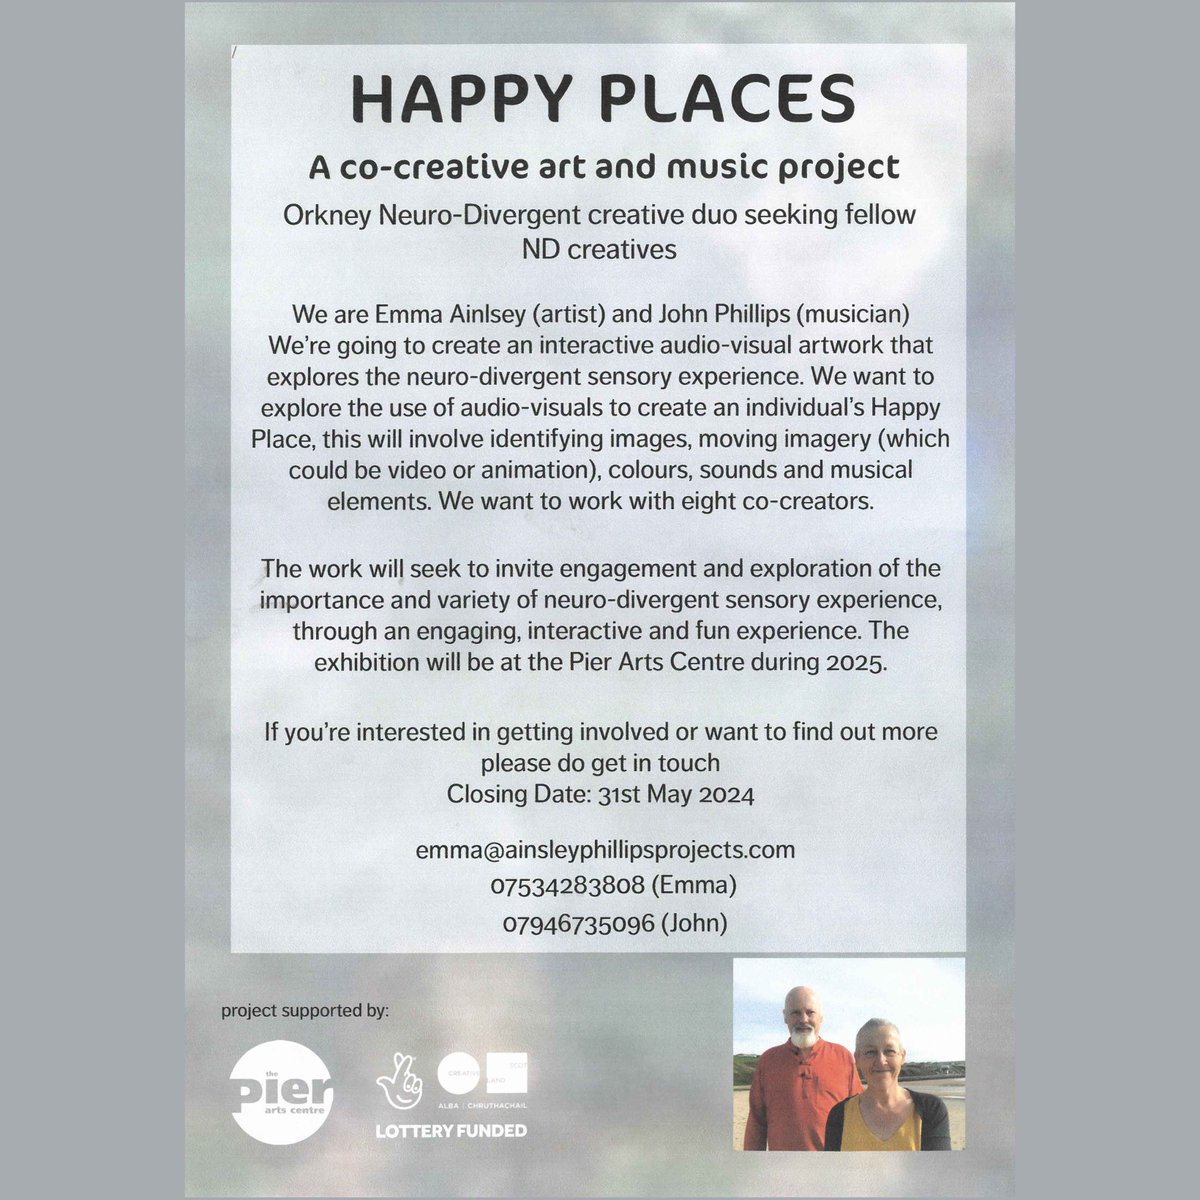 AinsleyPhillips Projects are seeking fellow Orkney based neuro-divergent creatives to work with on their Happy Places project. The final work will be shown at the Pier Arts Centre next year. CLOSING DATE 31 MAY 2024 For full details visit buff.ly/3wtC2Xc #Orkney